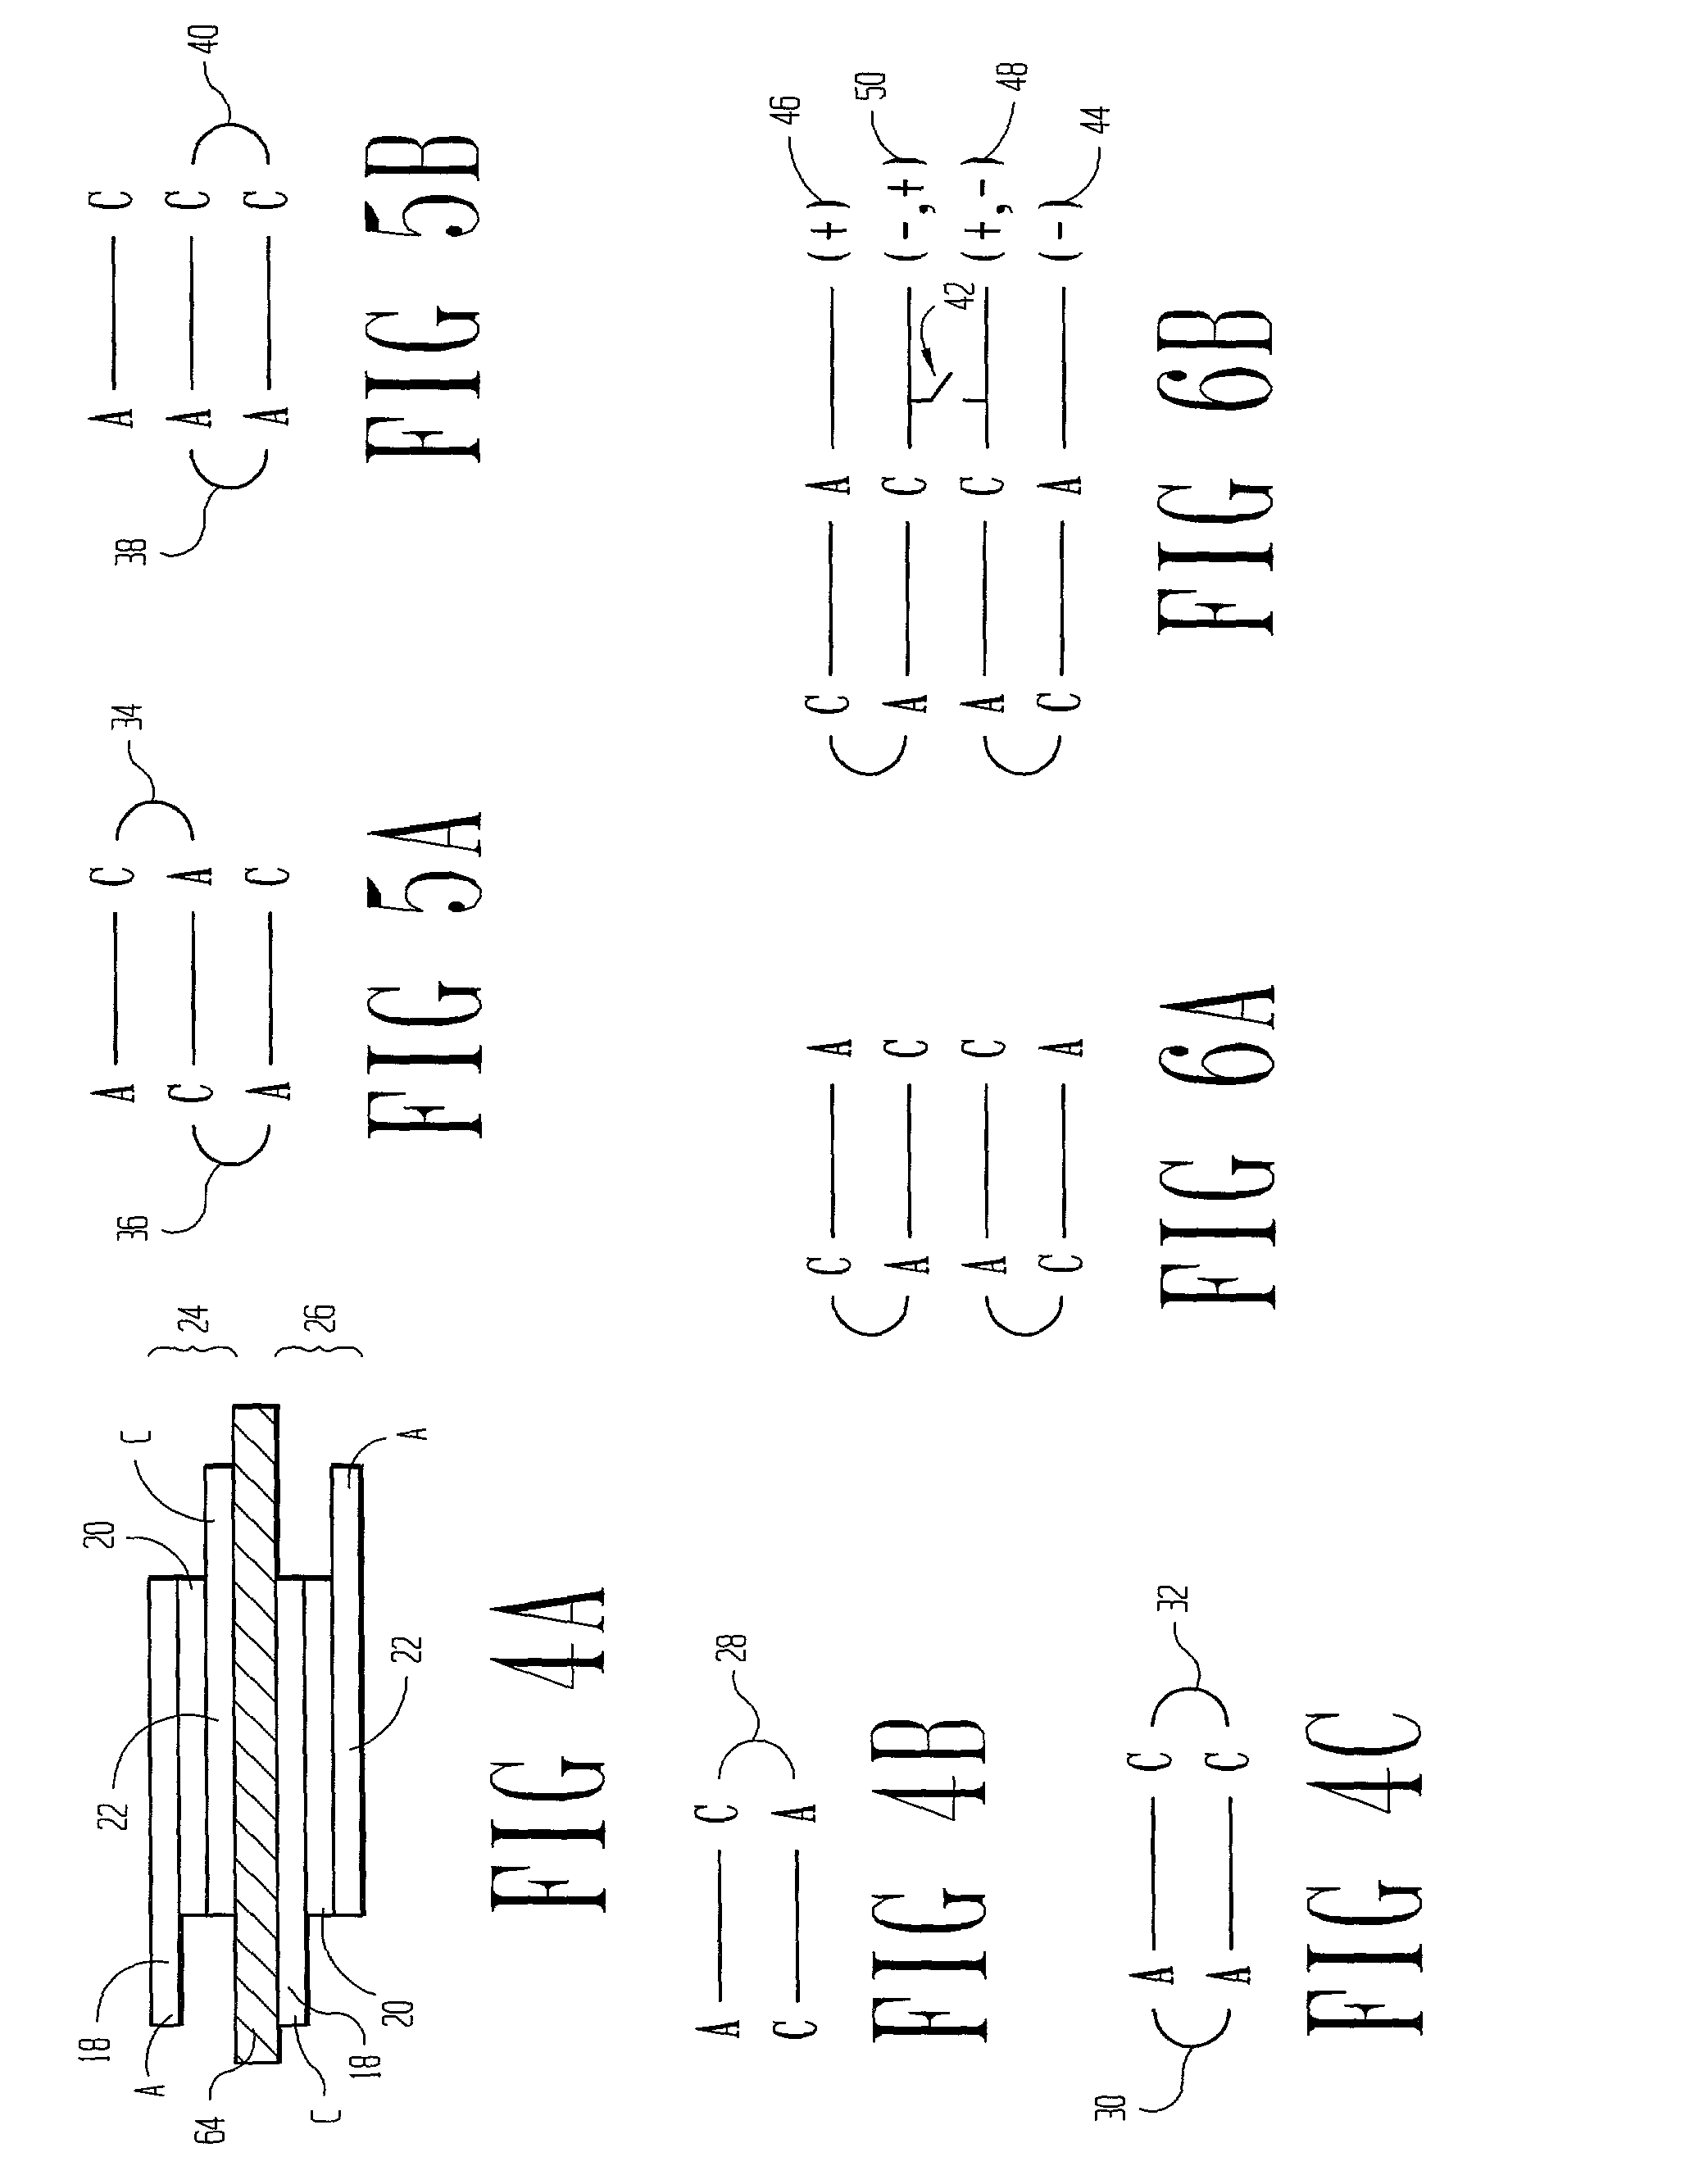 Consecutively wound or stacked battery cells